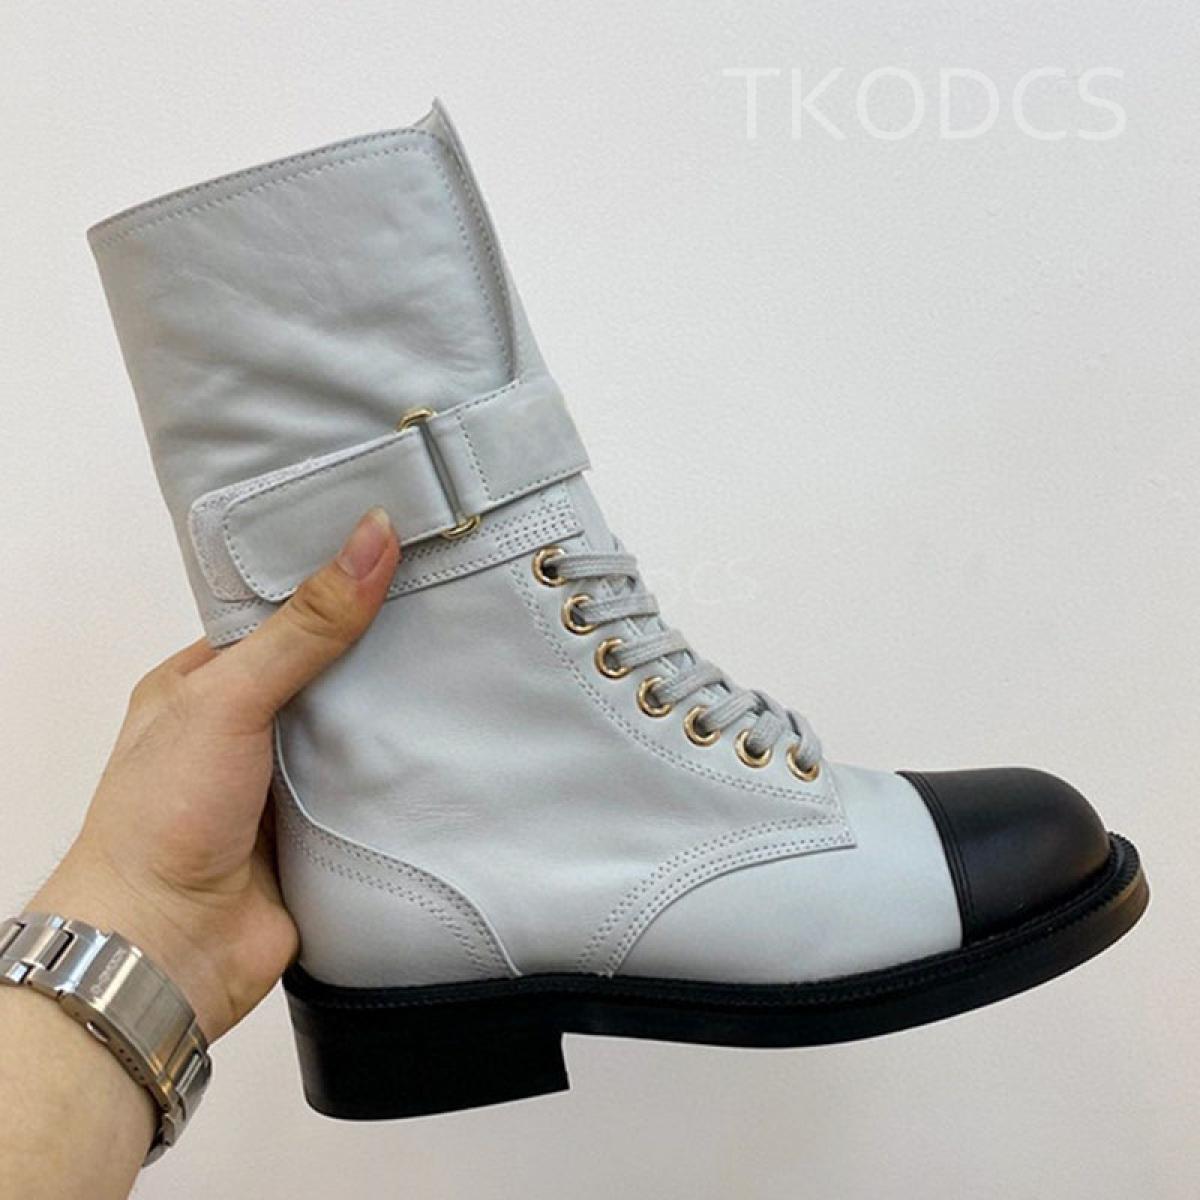 New Luxury Design Short Boots Women Genuine Leather Ankle Boots Woman New Arrival Cross Tied Botas Mujer Brand Knight Bo